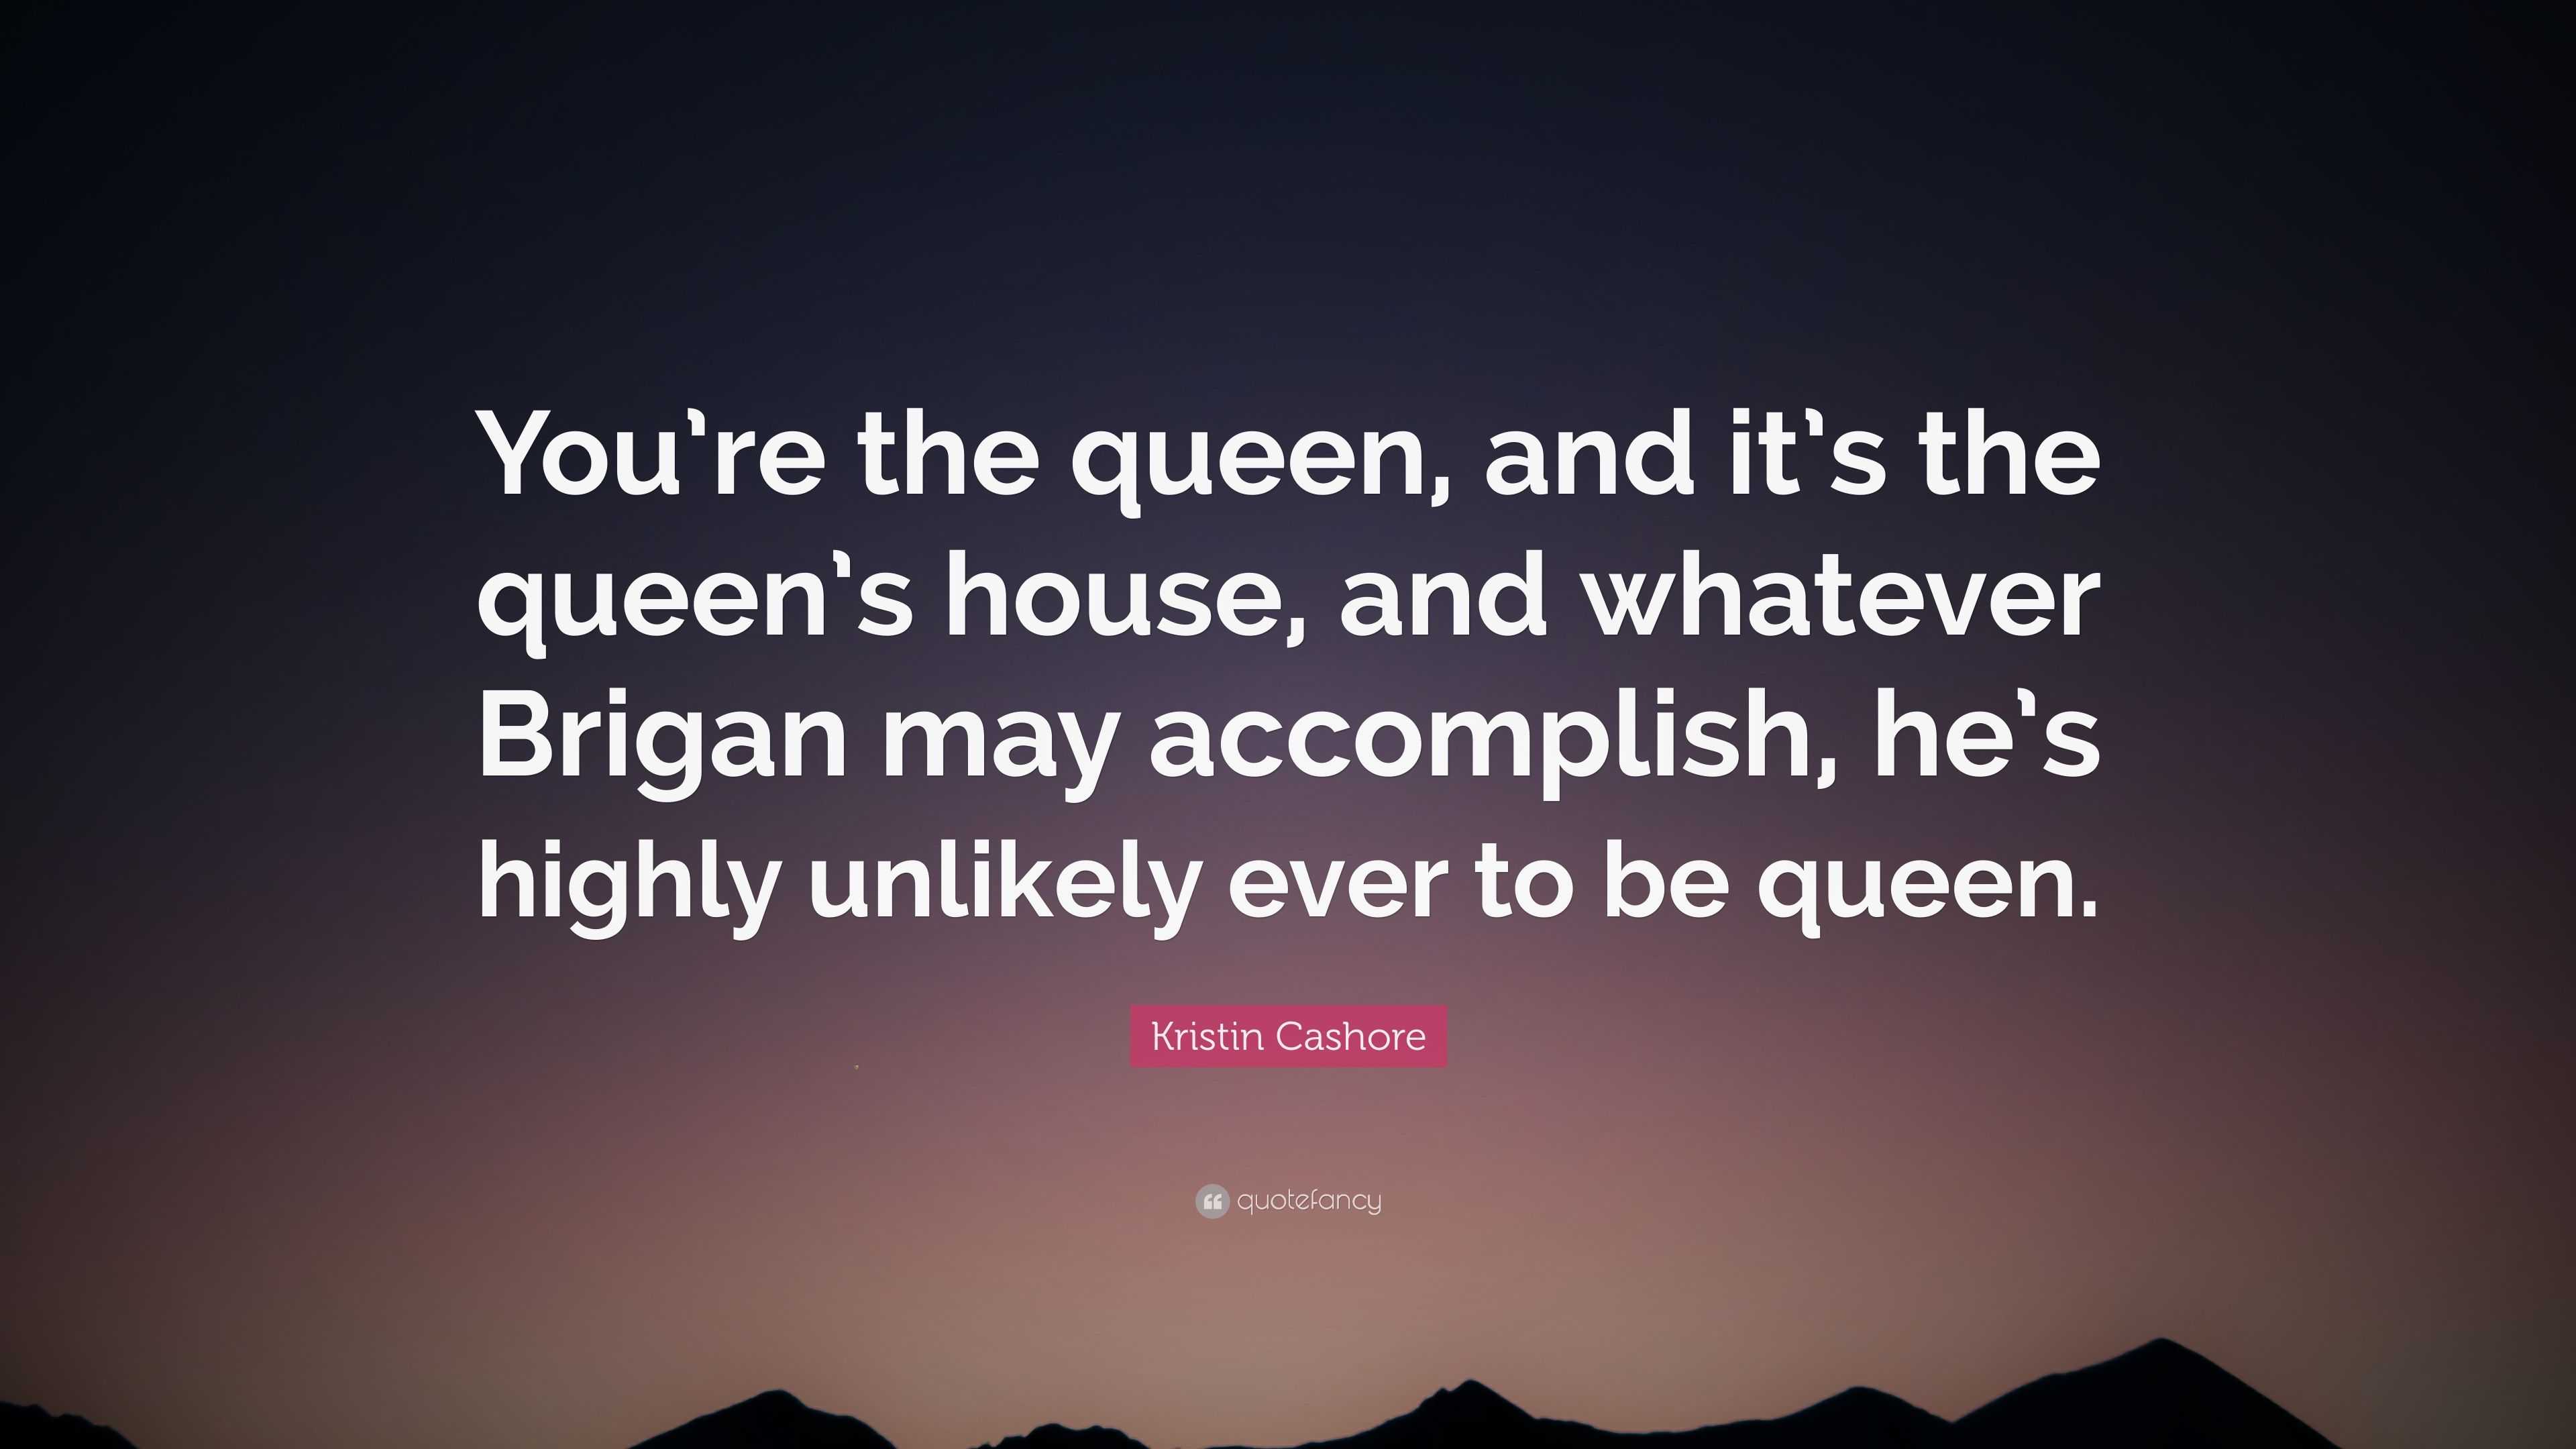 Kristin Cashore Quote: “You’re the queen, and it’s the queen’s house ...